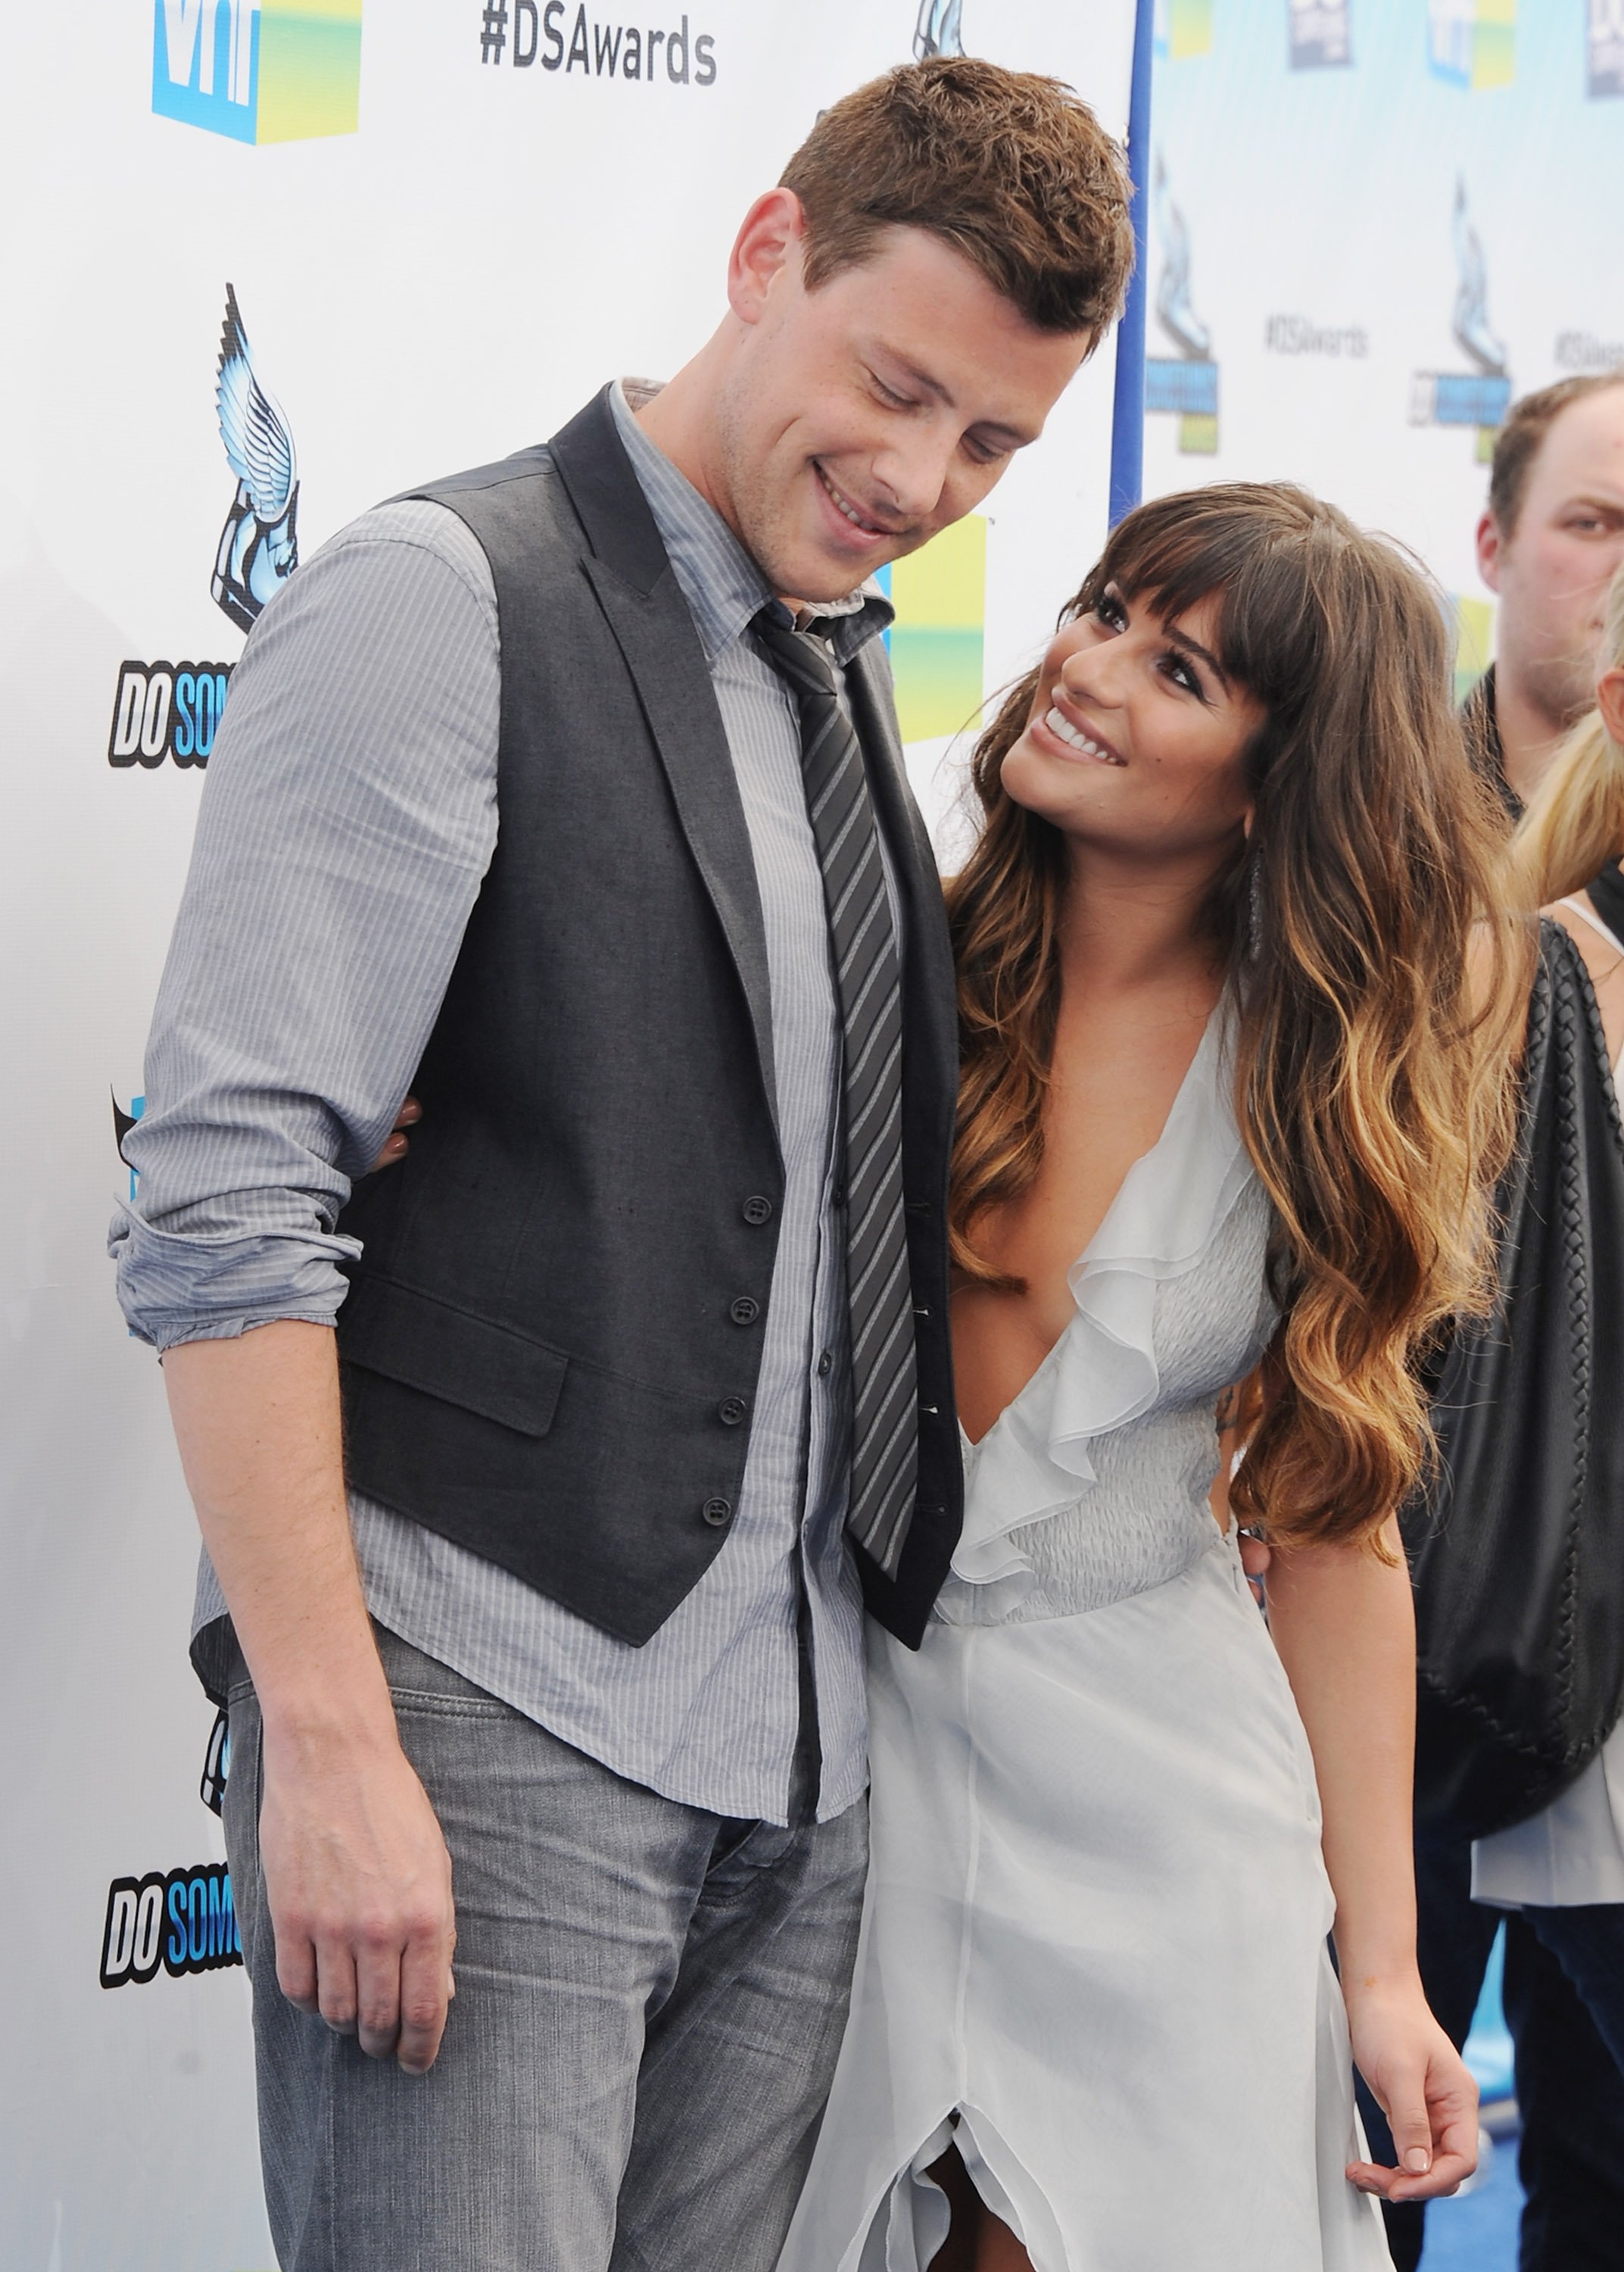 Cory Monteith and Lea Michele at the Do Something Awards on August 19, 2012 | Source: Getty Images